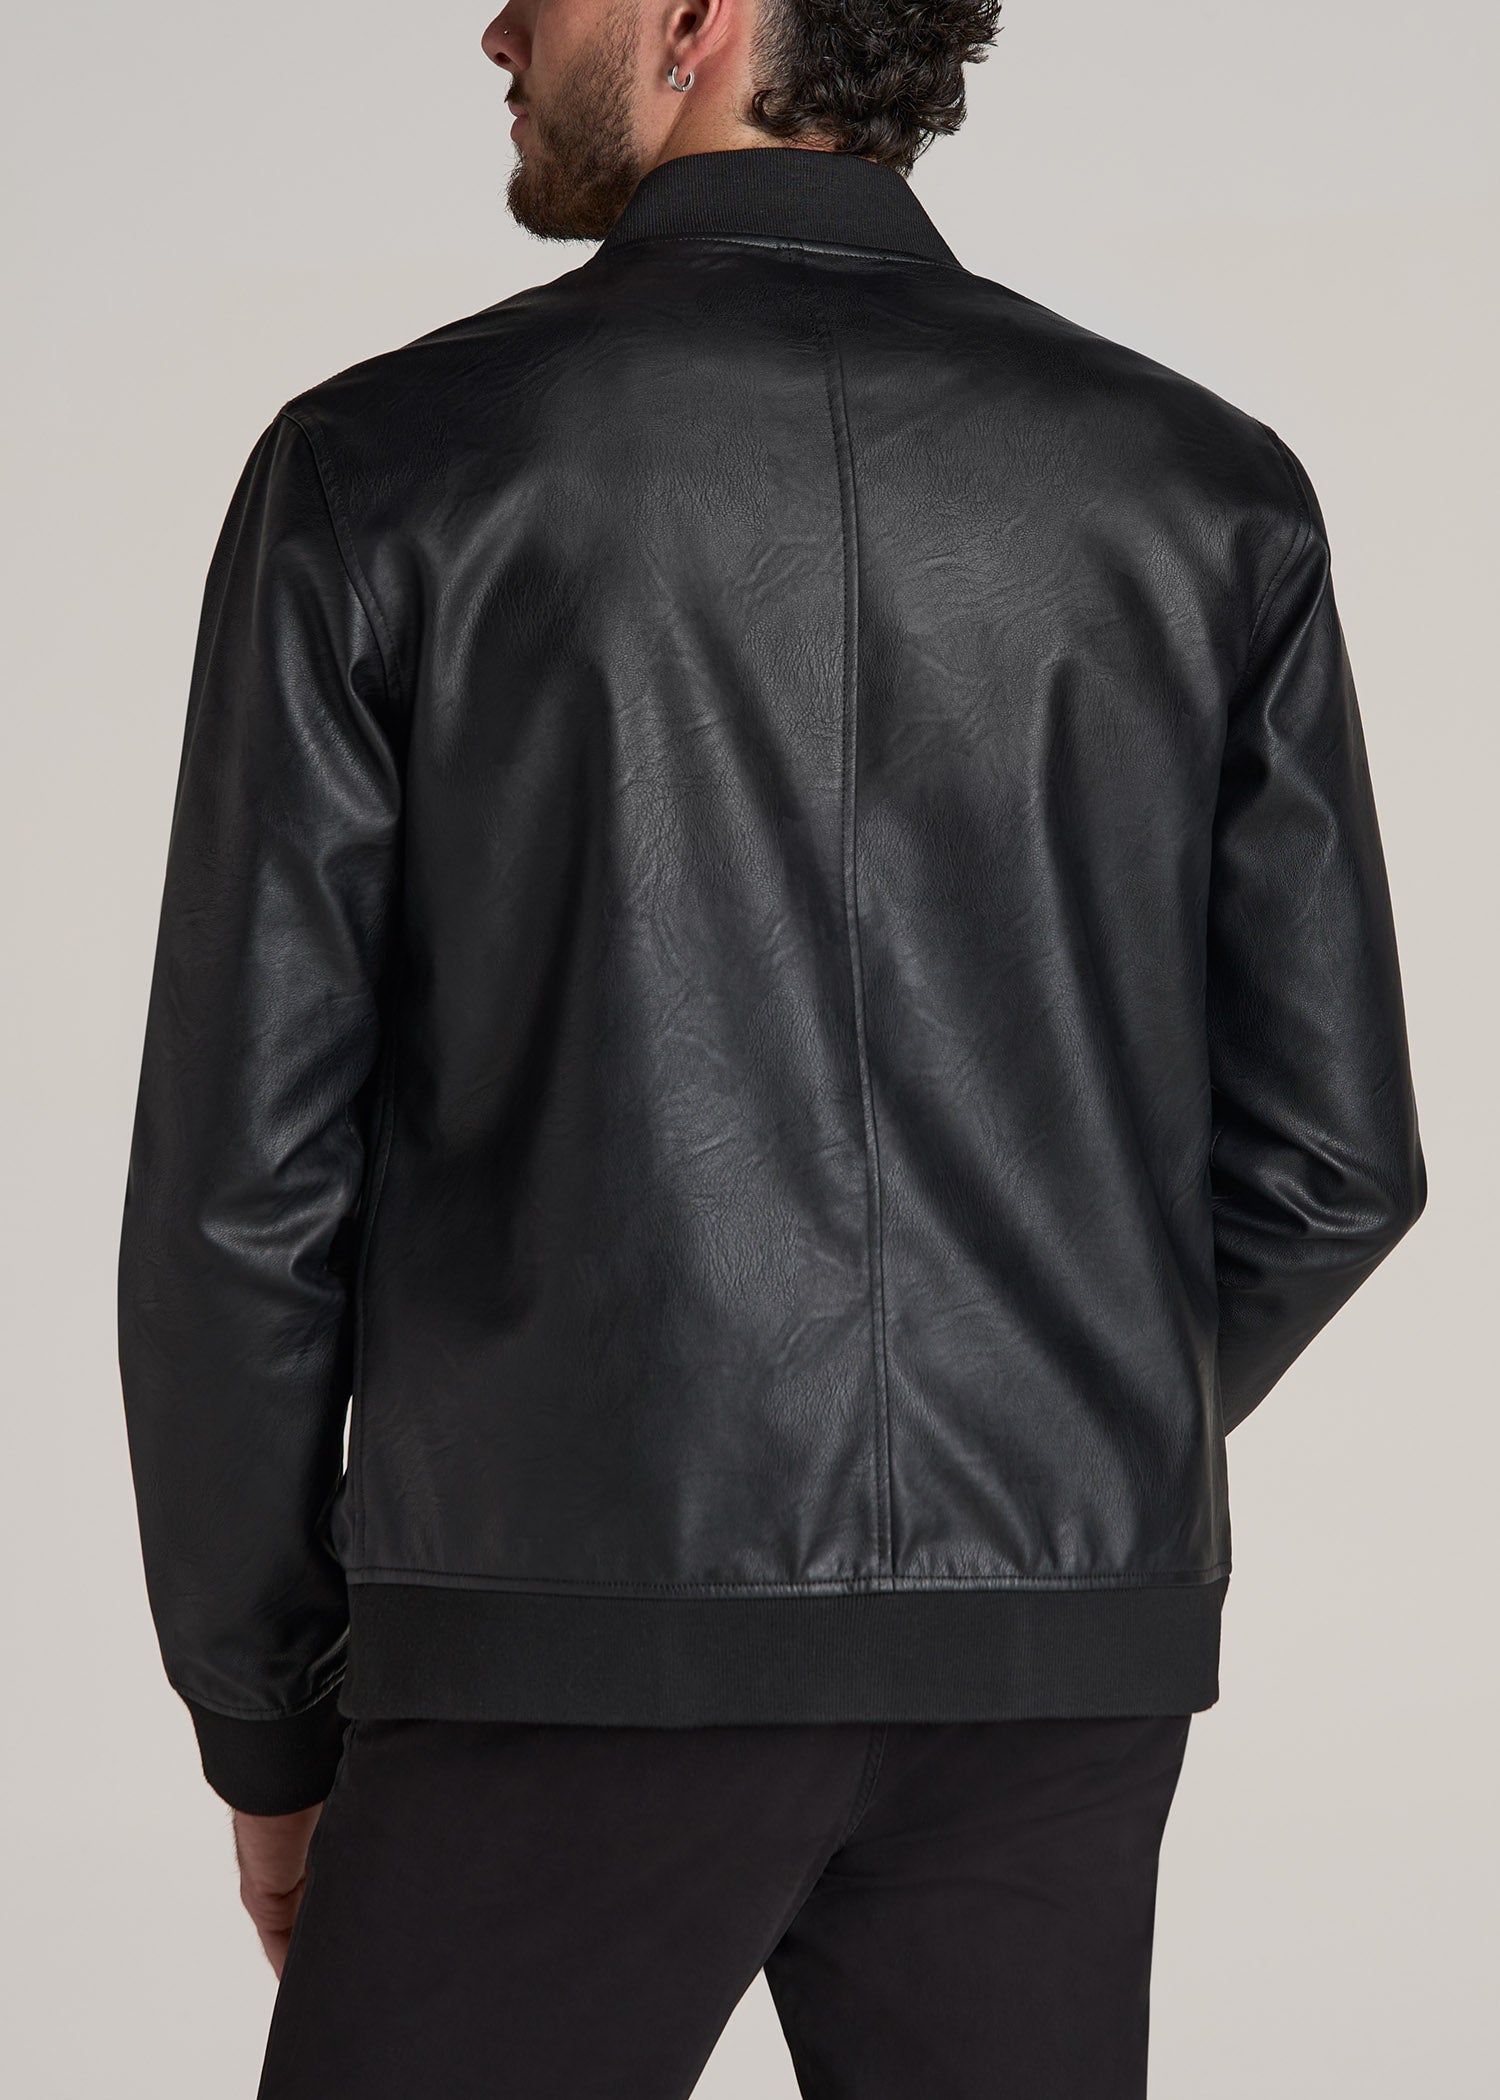 How to Maintain Faux Leather? - The Jacket Maker Blog